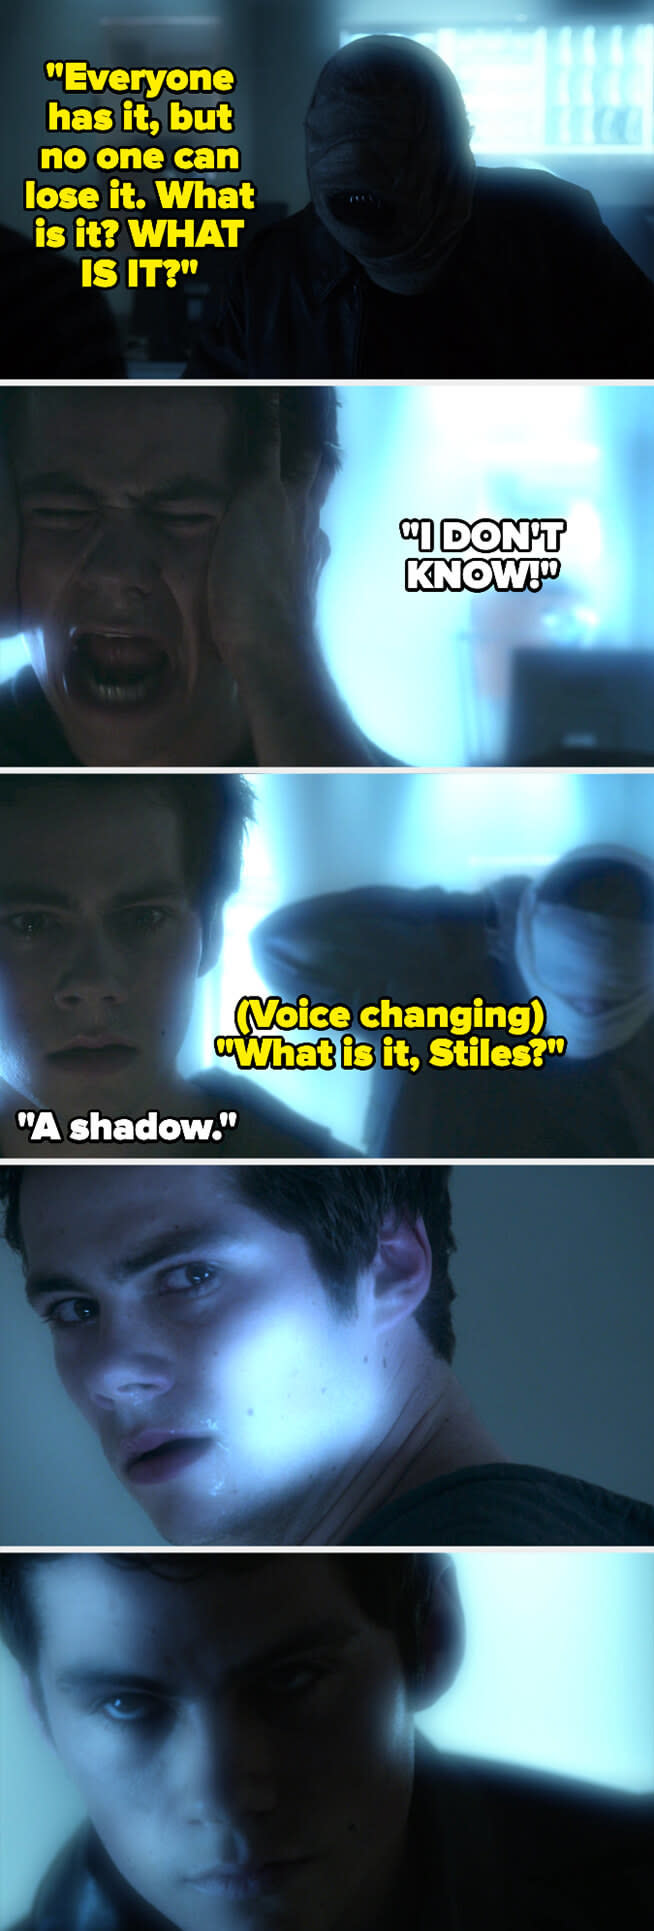 the nogitsune keeps asking Stiles what his riddle ("everyone has it, but no one can lose it") means, and Stiles says "I don't know!" then realizes it's a shadow and turns to see himself